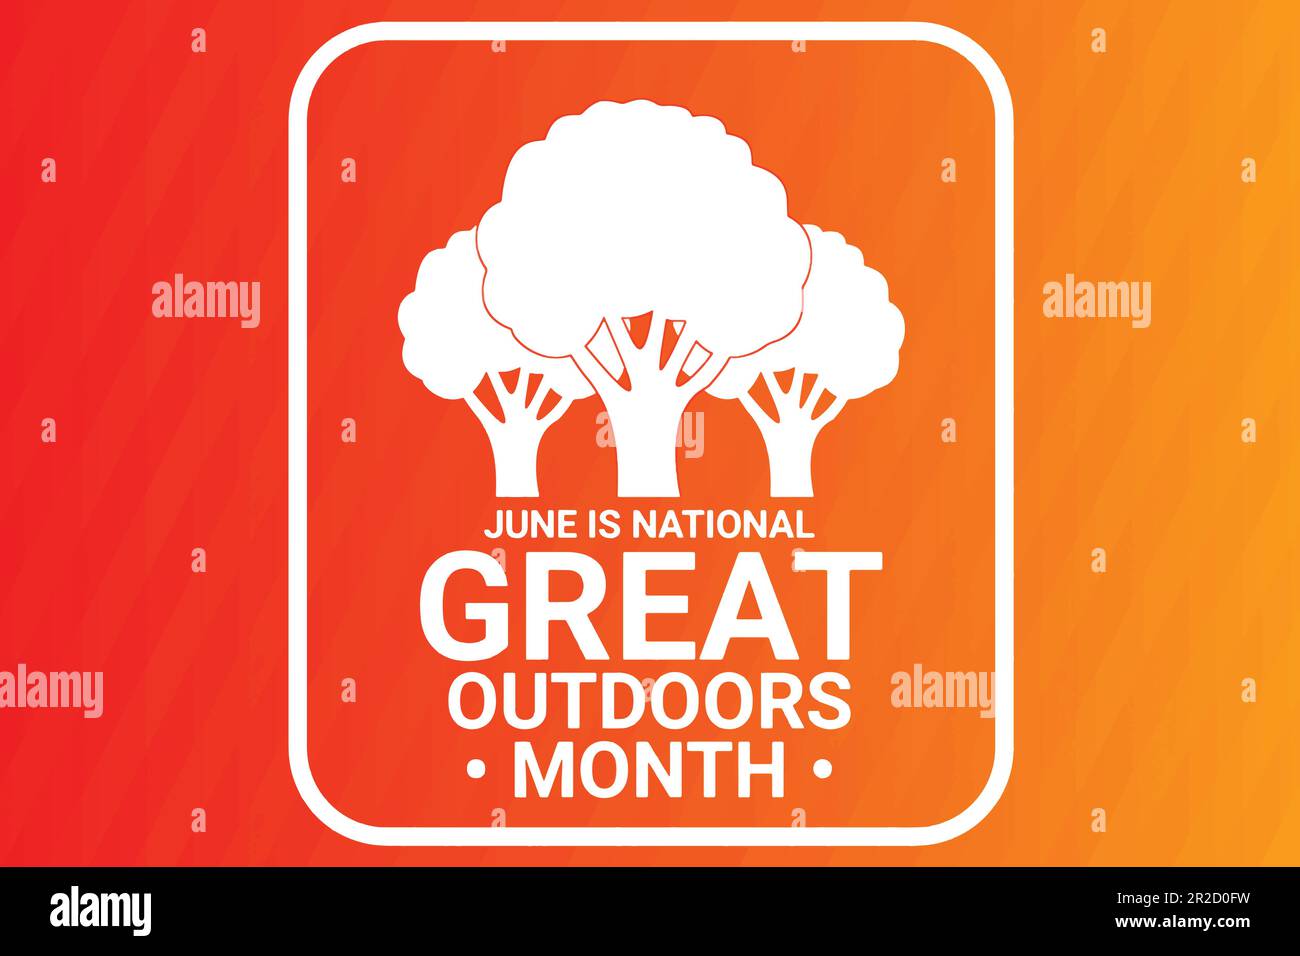 June Is National Great Outdoors Month. Holiday concept. Template for